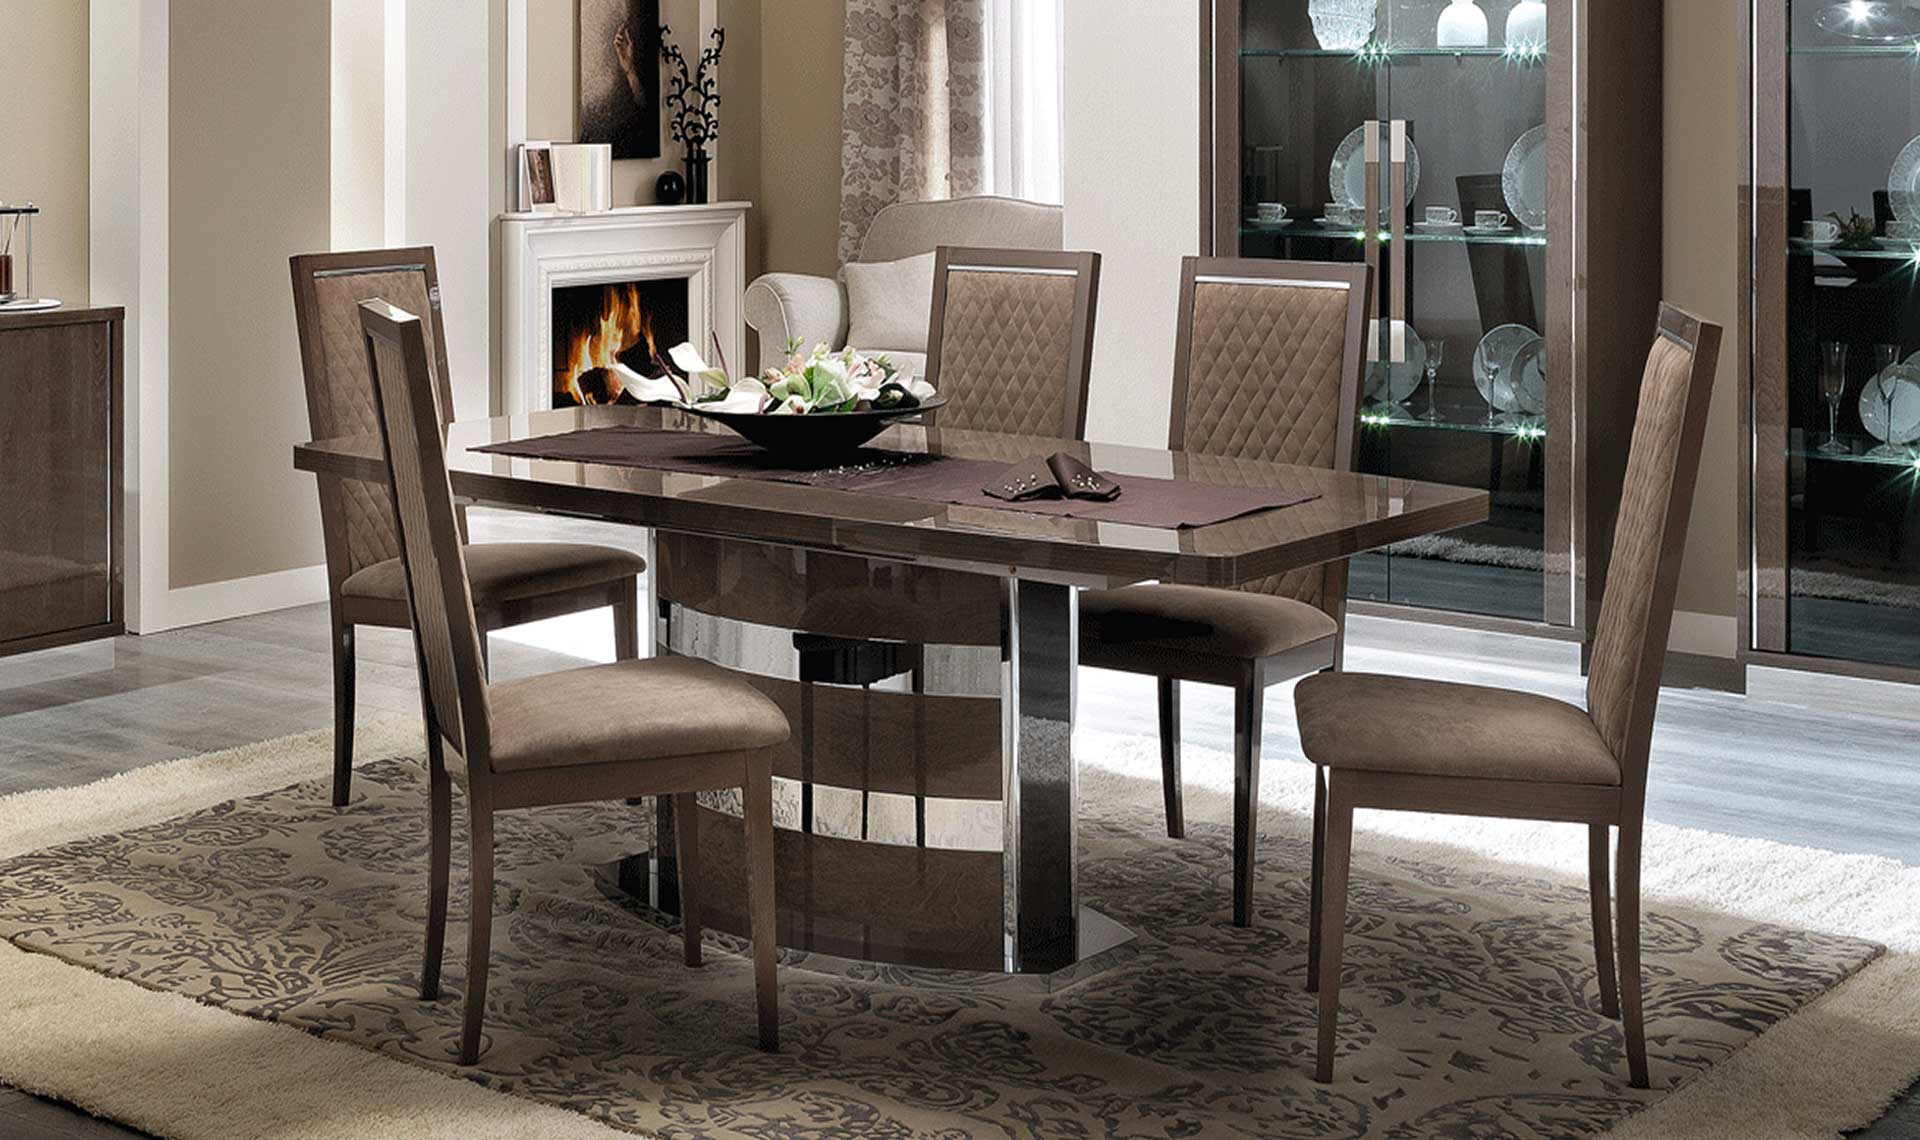 Platinum And Black Dining Room Table Set